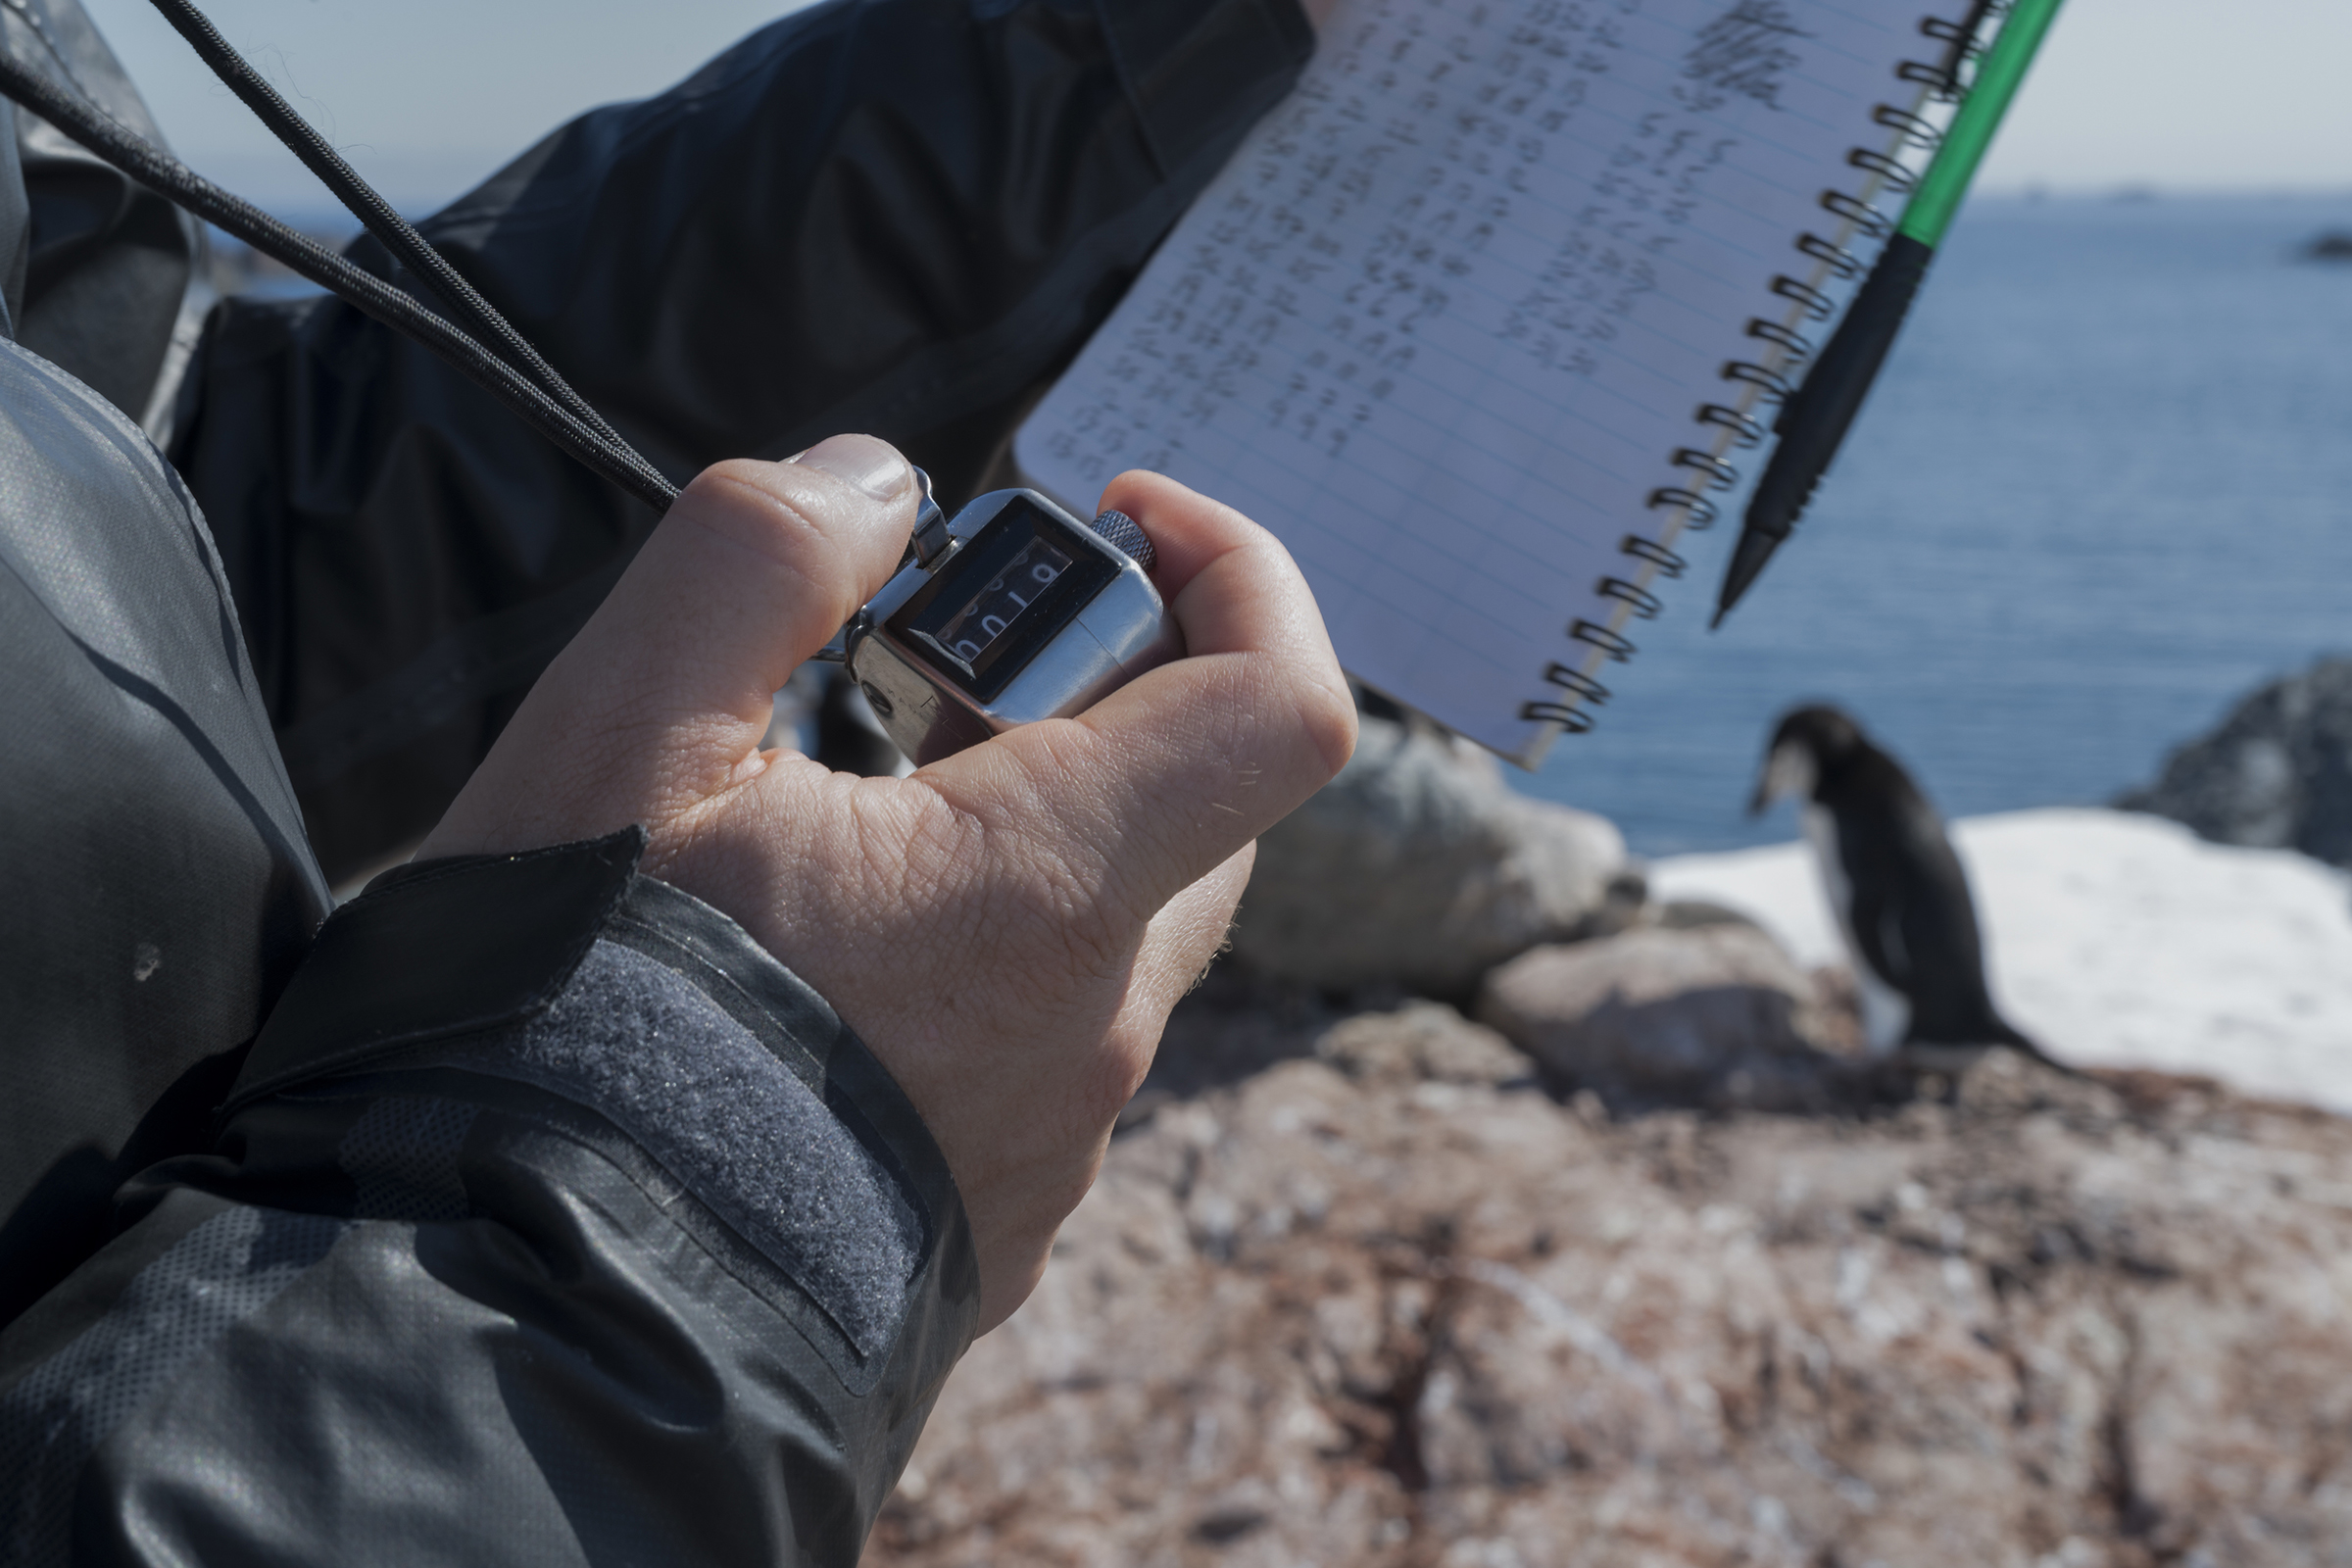 Scientist Noah Strycker from Stony Brook University Scientist uses a clicker to count chinstrap penguins on Quinton Point, Anvers Island in the Antarctic, on Feb. 4, 2020. (Christian Åslund —Greenpeace and TIME)